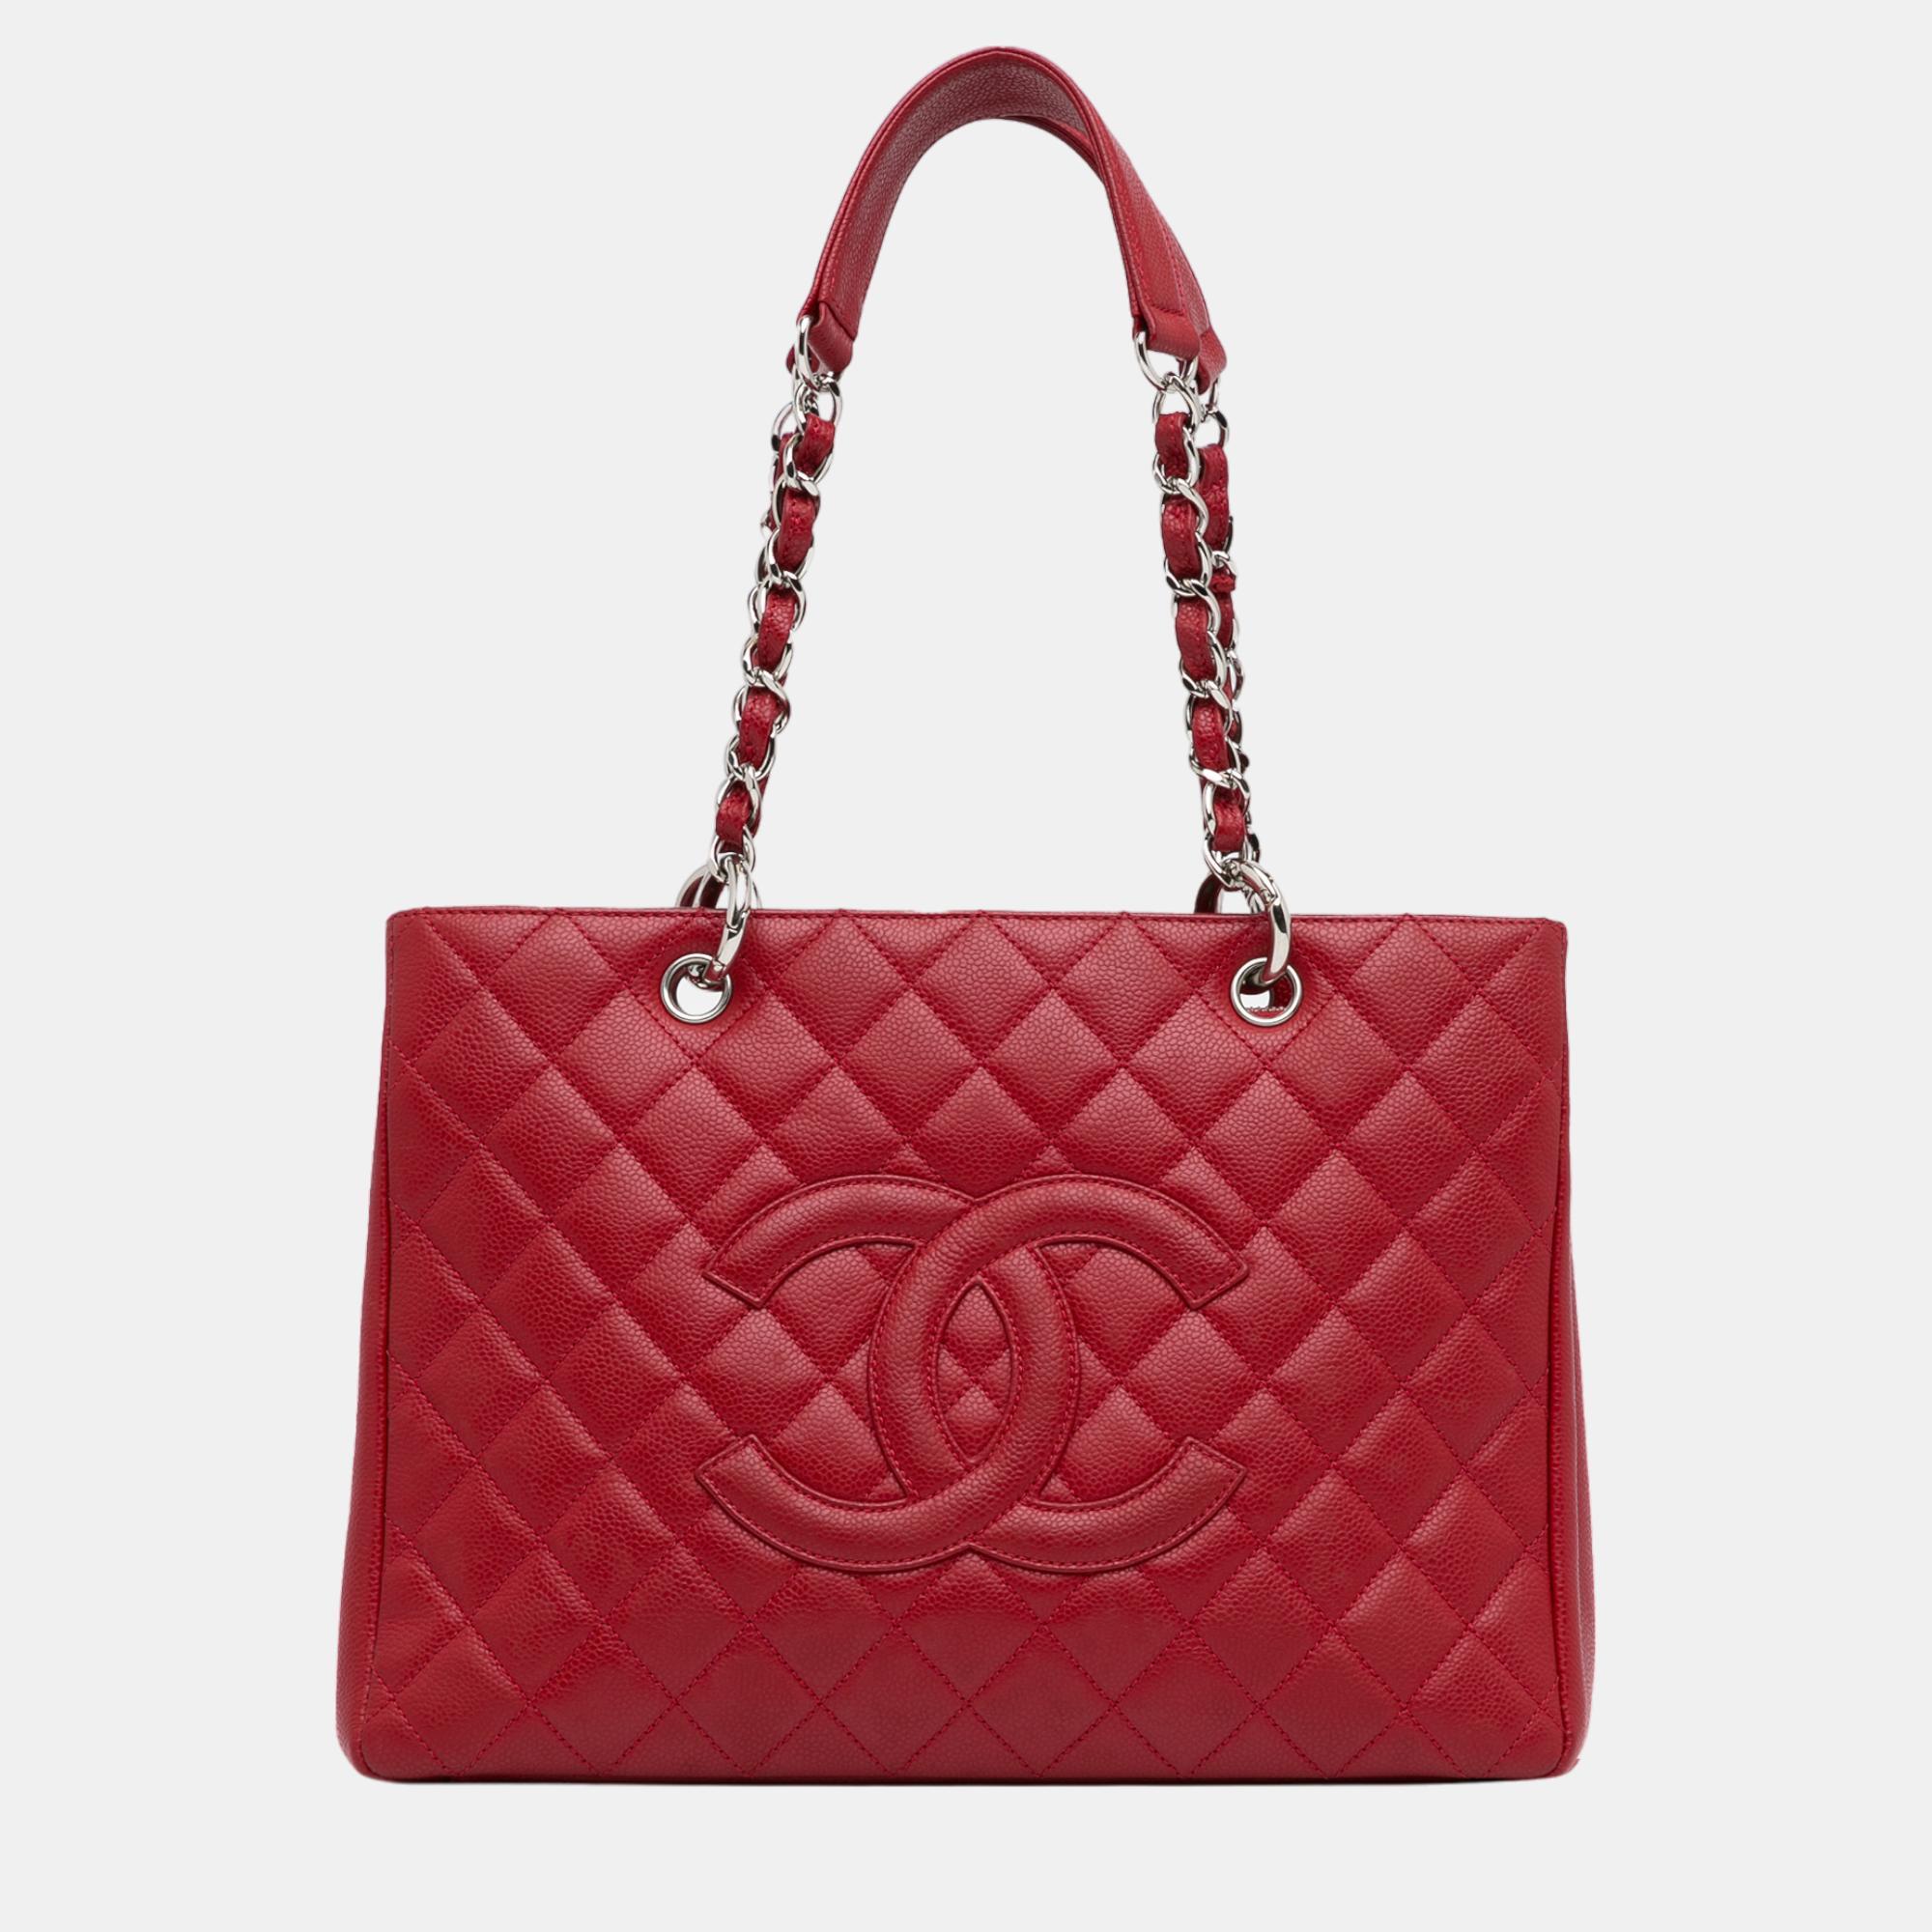 Chanel red caviar grand shopping tote